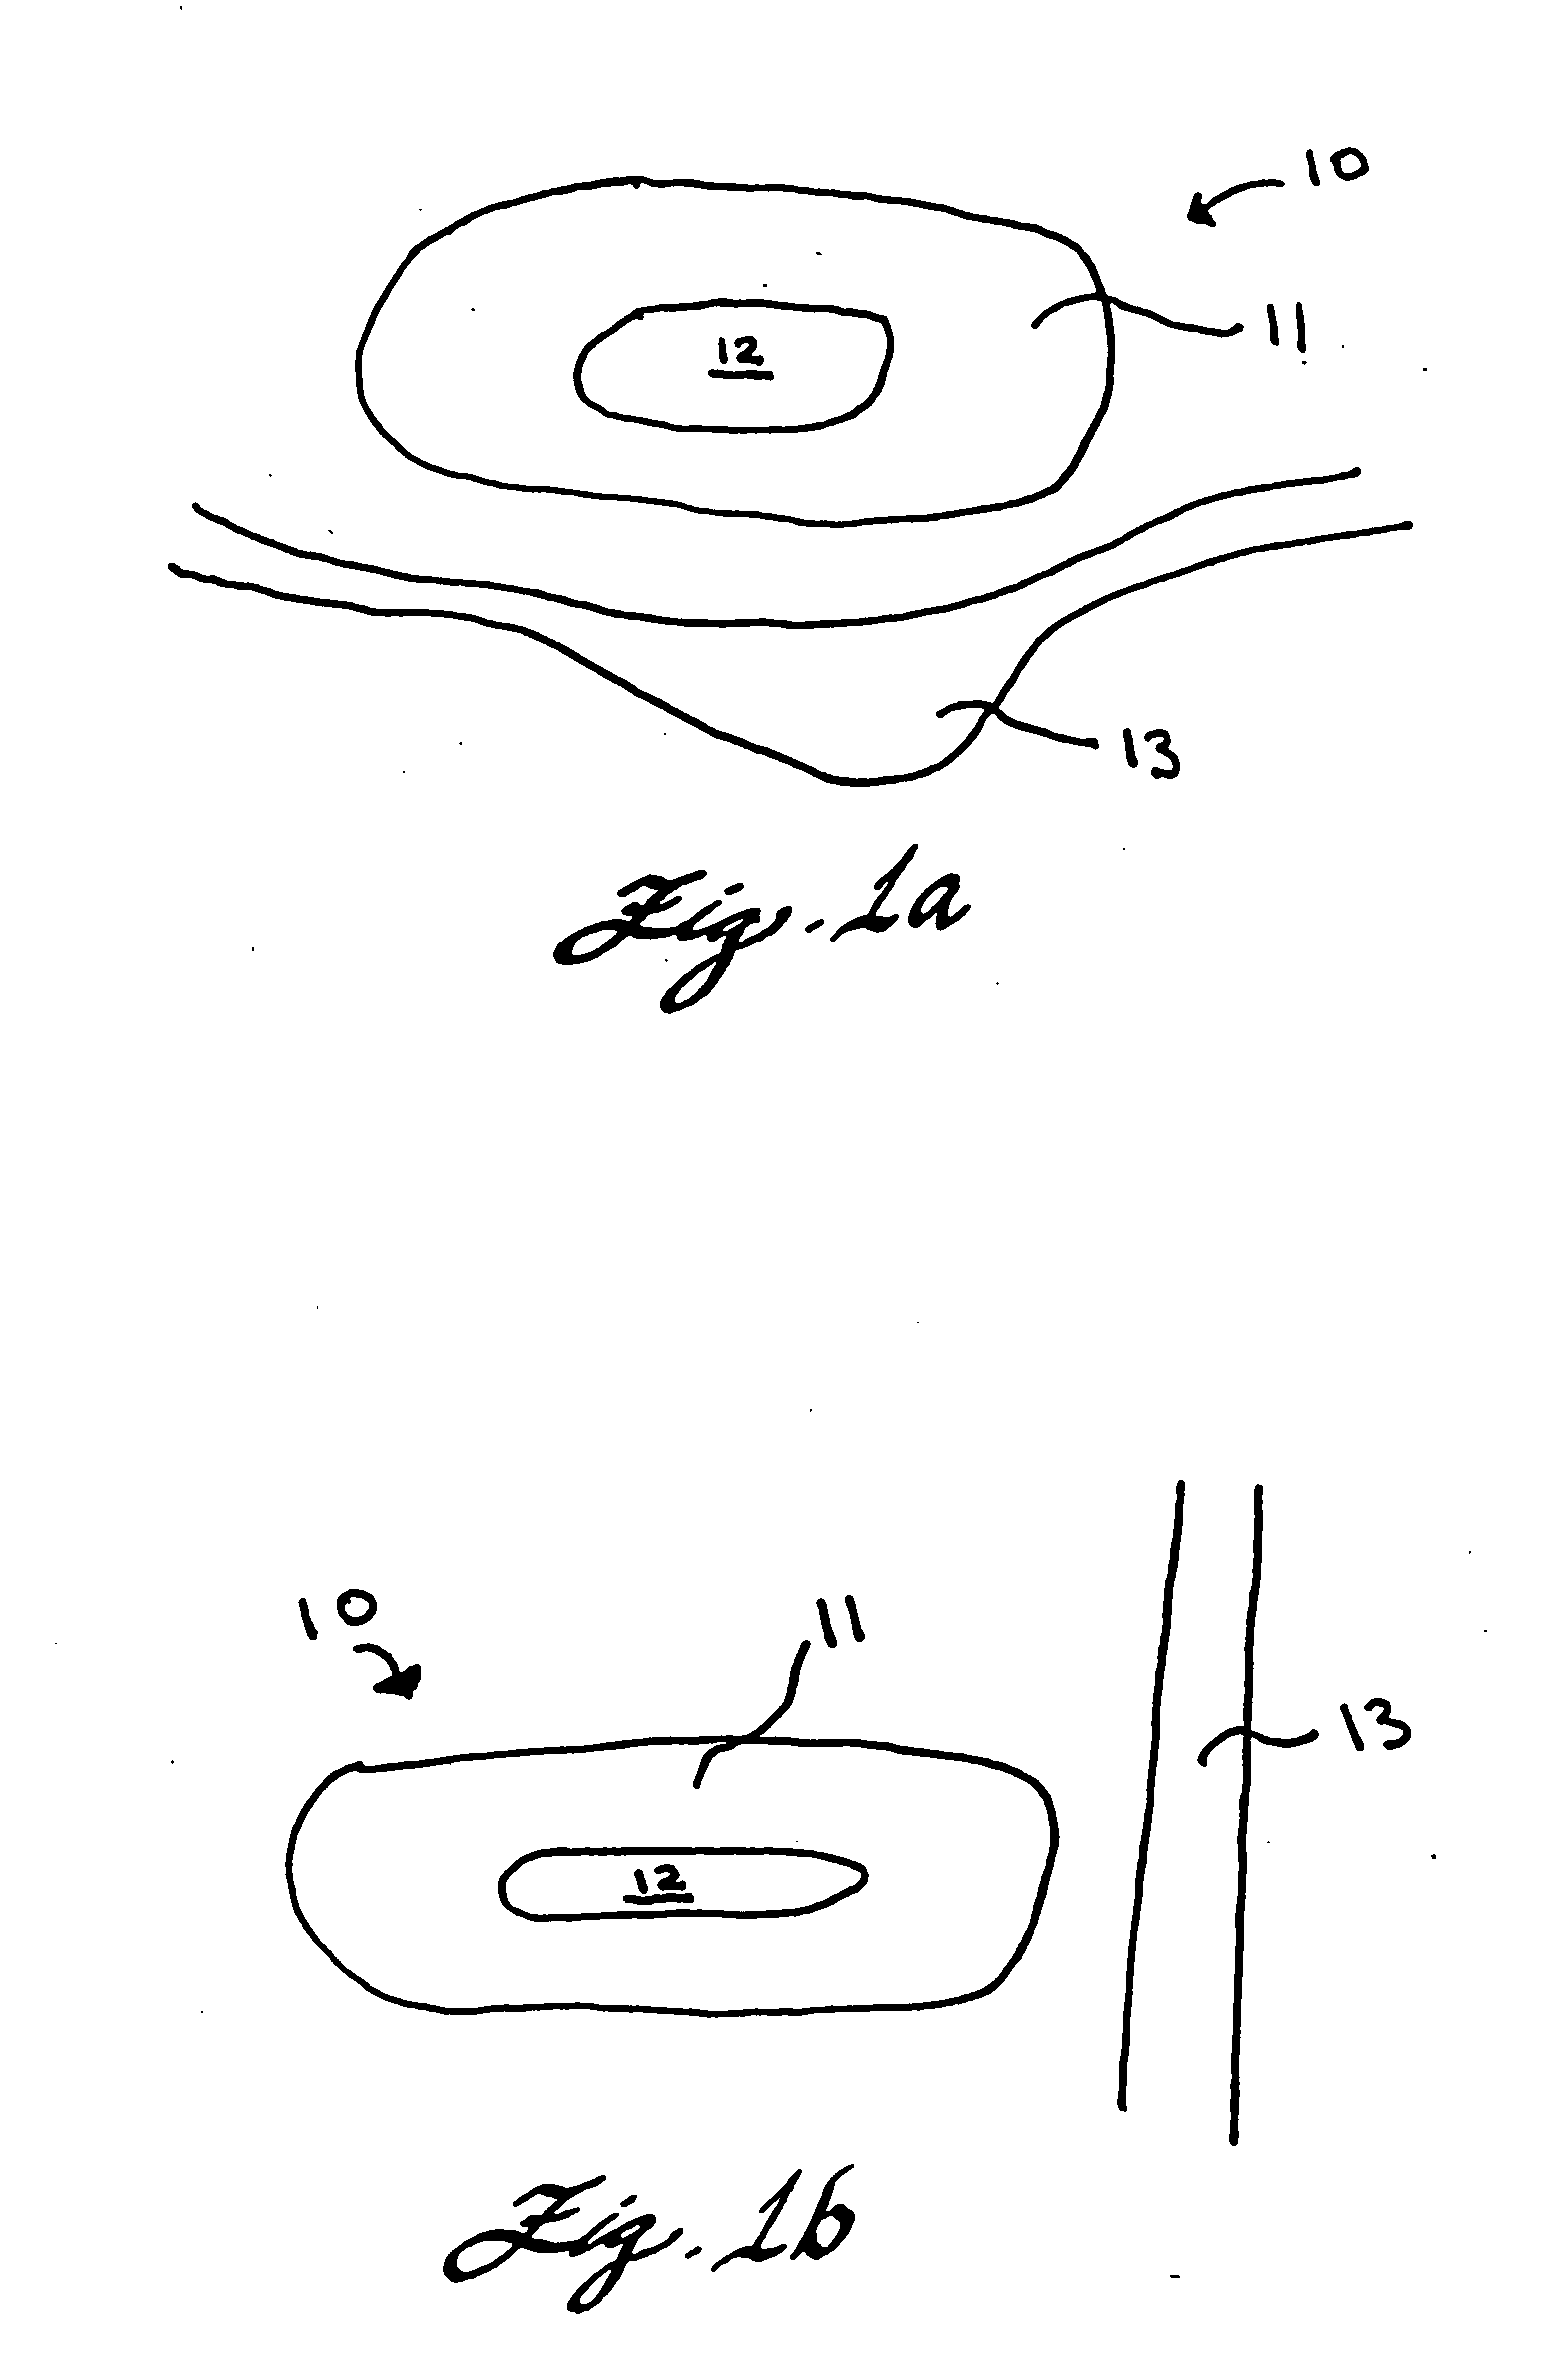 Expandable implant for repairing a defect in a nucleus of an intervertebral disc